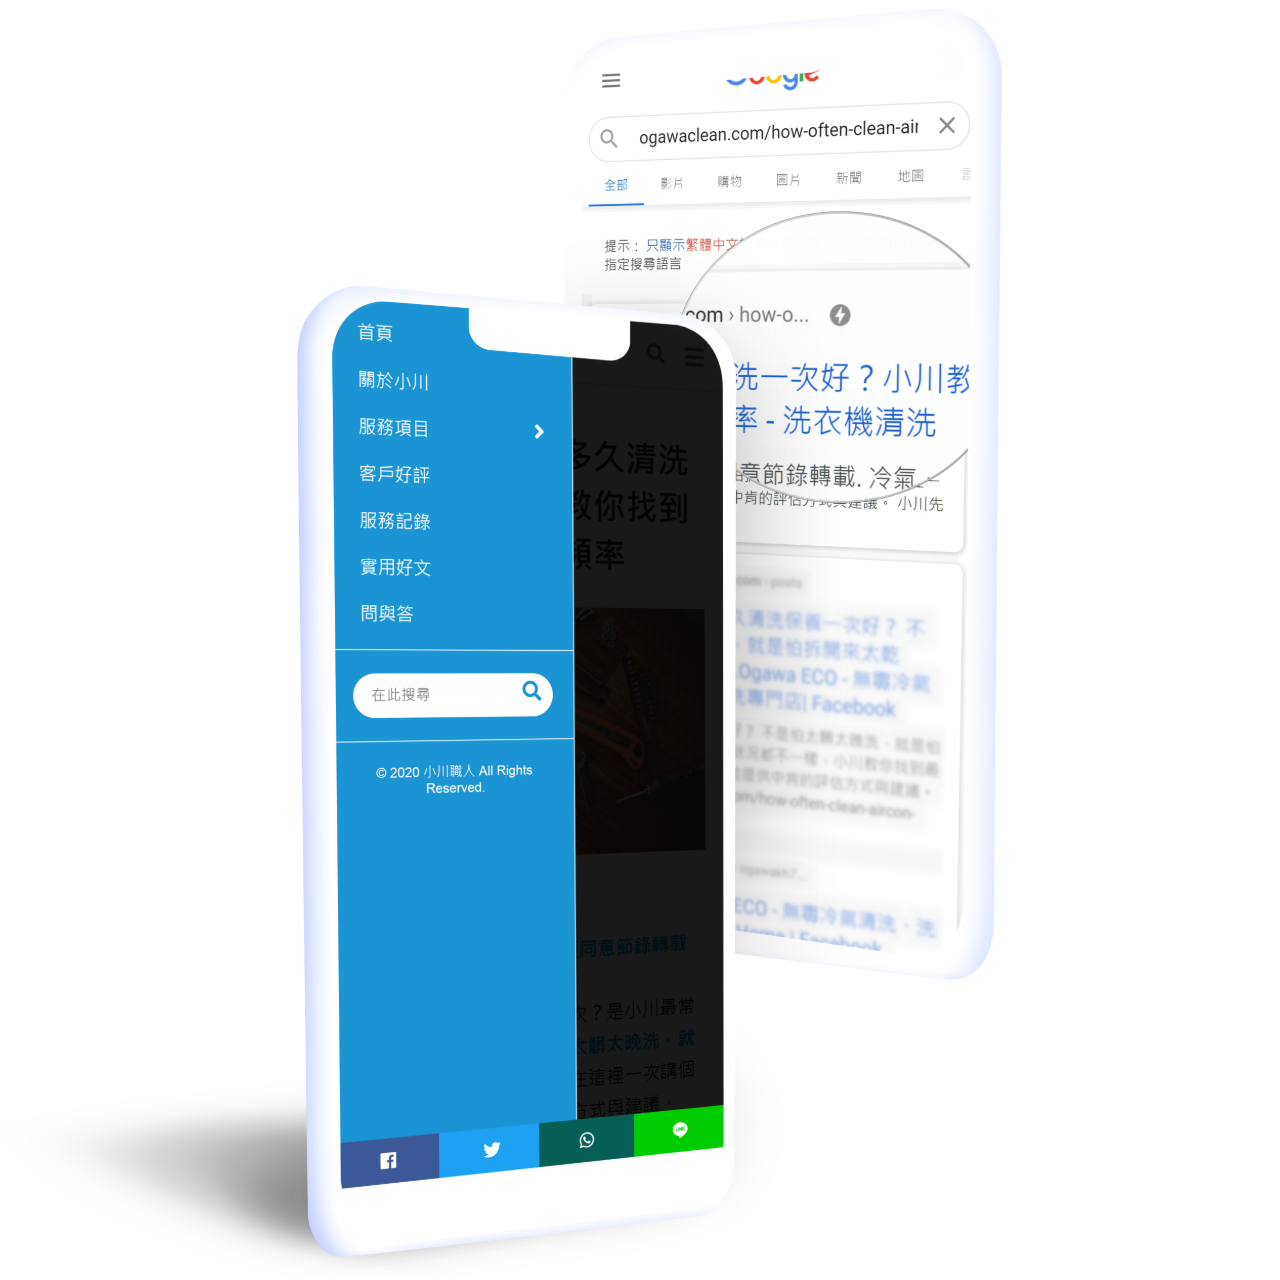 Ke2B Projects - Ogawa ECO (the old ver.) - Google SERP with the certification icon of Google AMP (articles) and mobile menu of AMP version